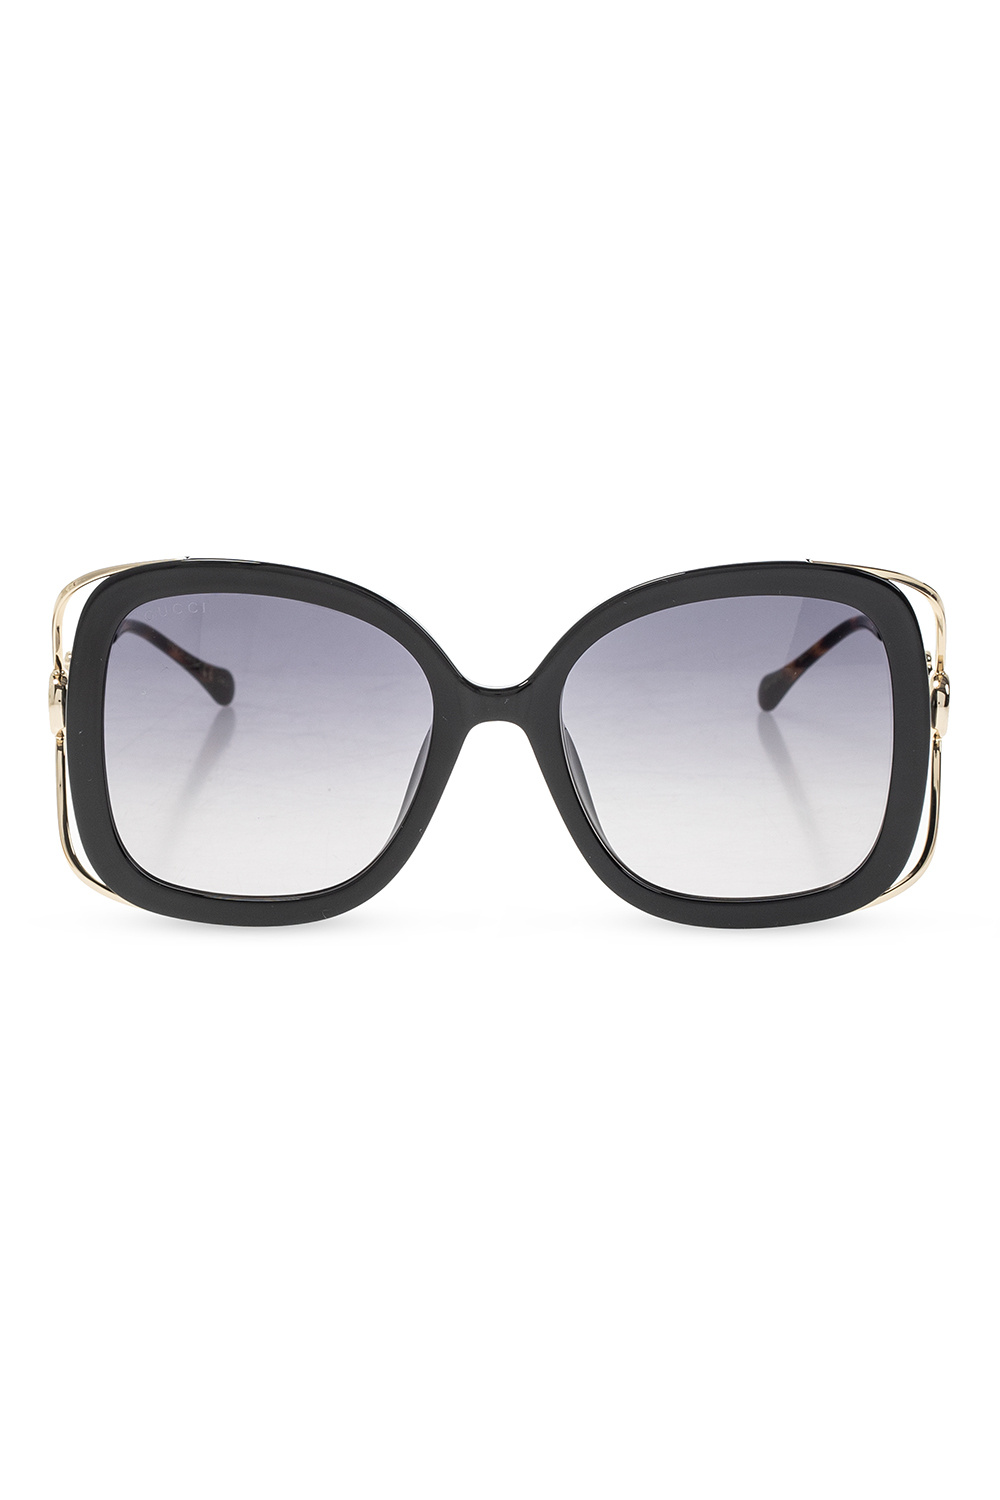 Balmain Imperial 53mm Square Sunglasses - Gold Red One-Size